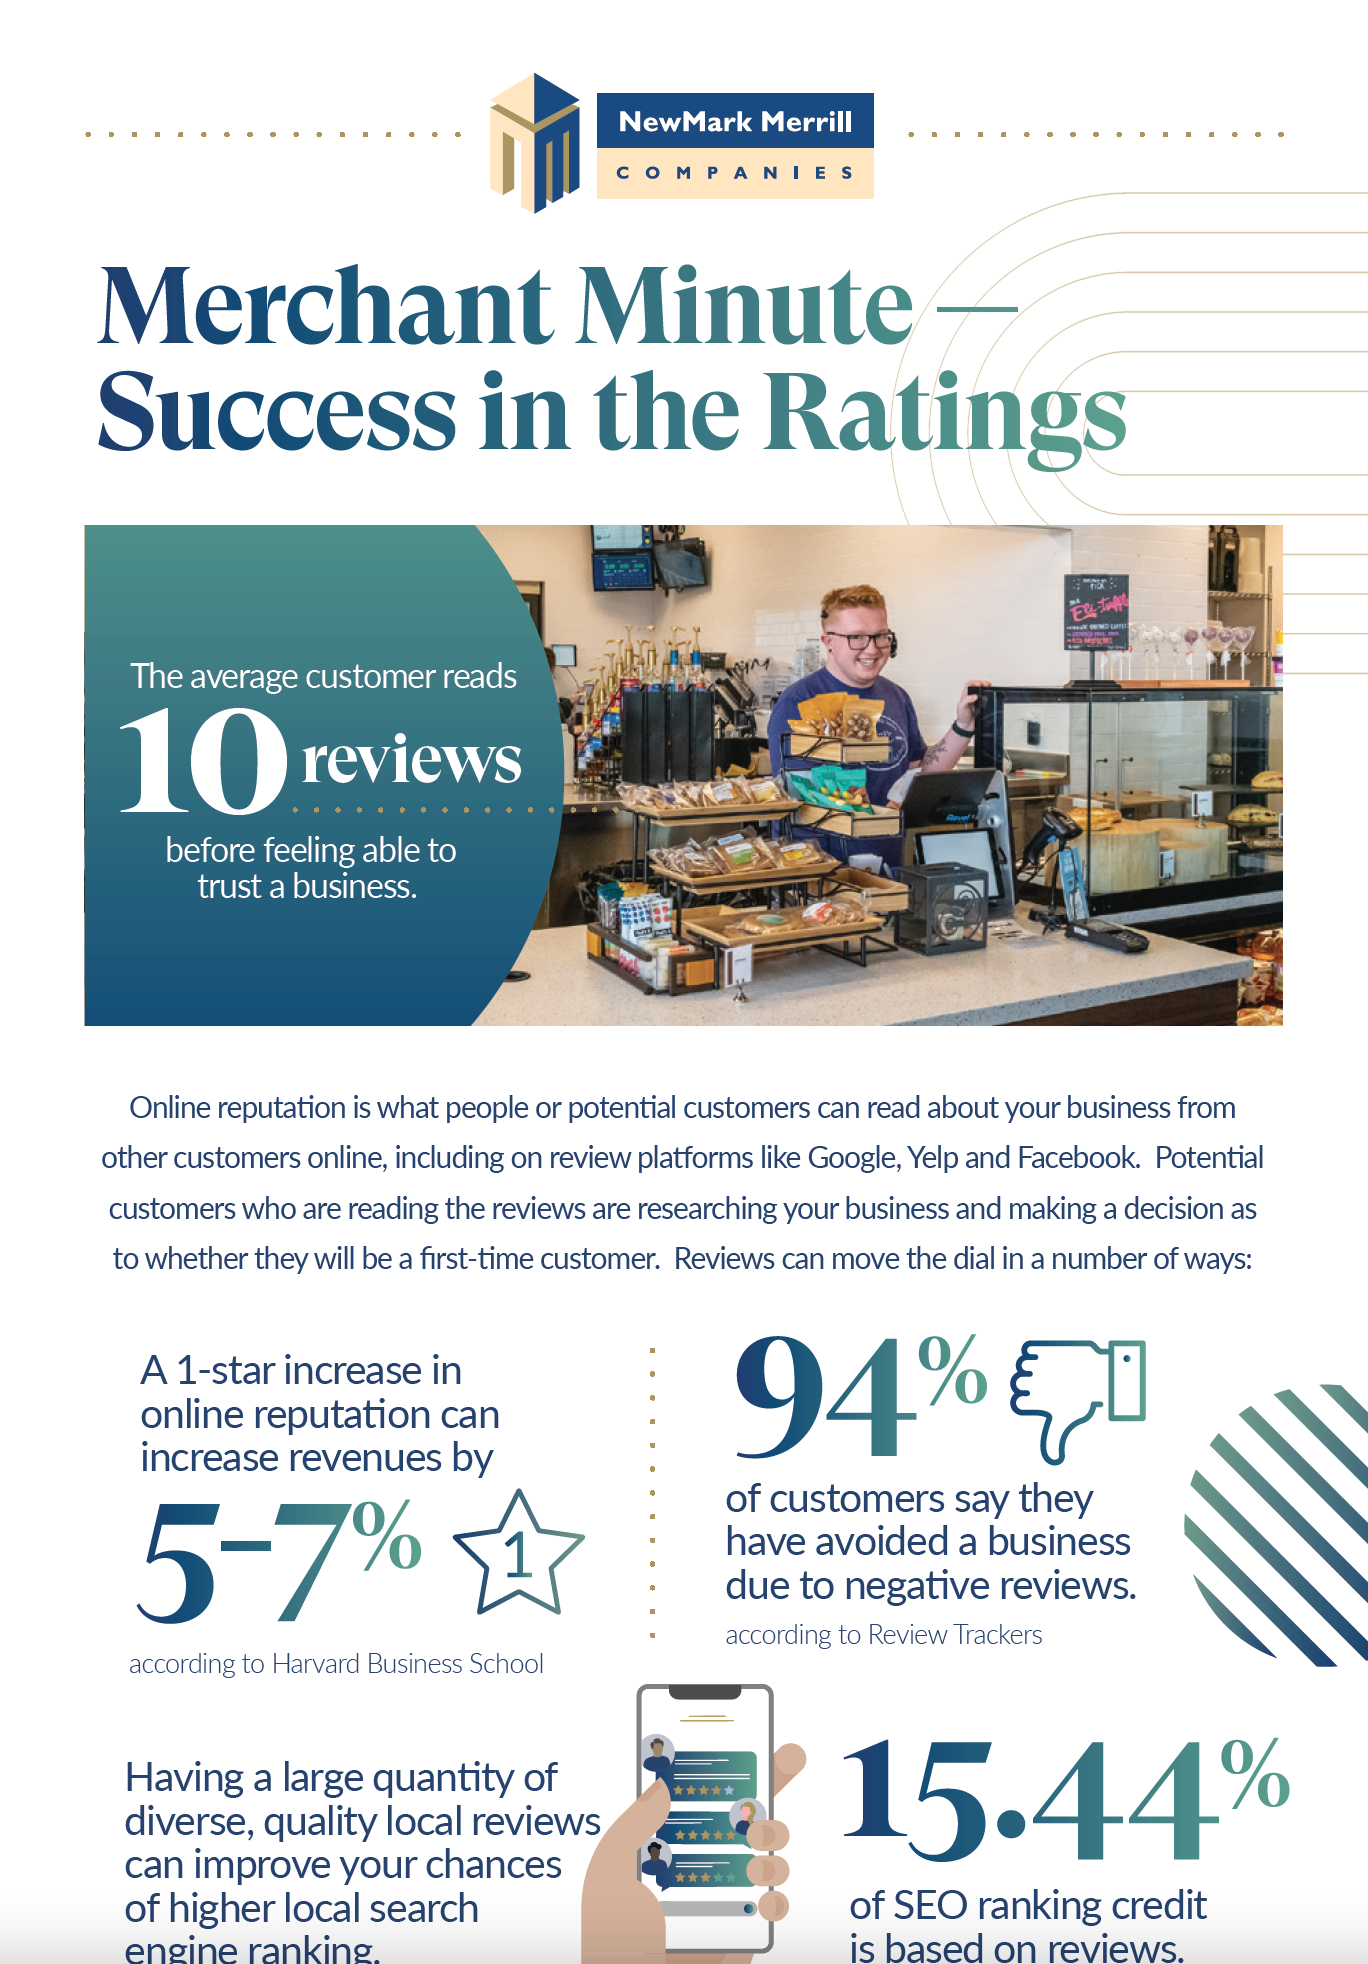 Merchant Minute - Success in the Ratings